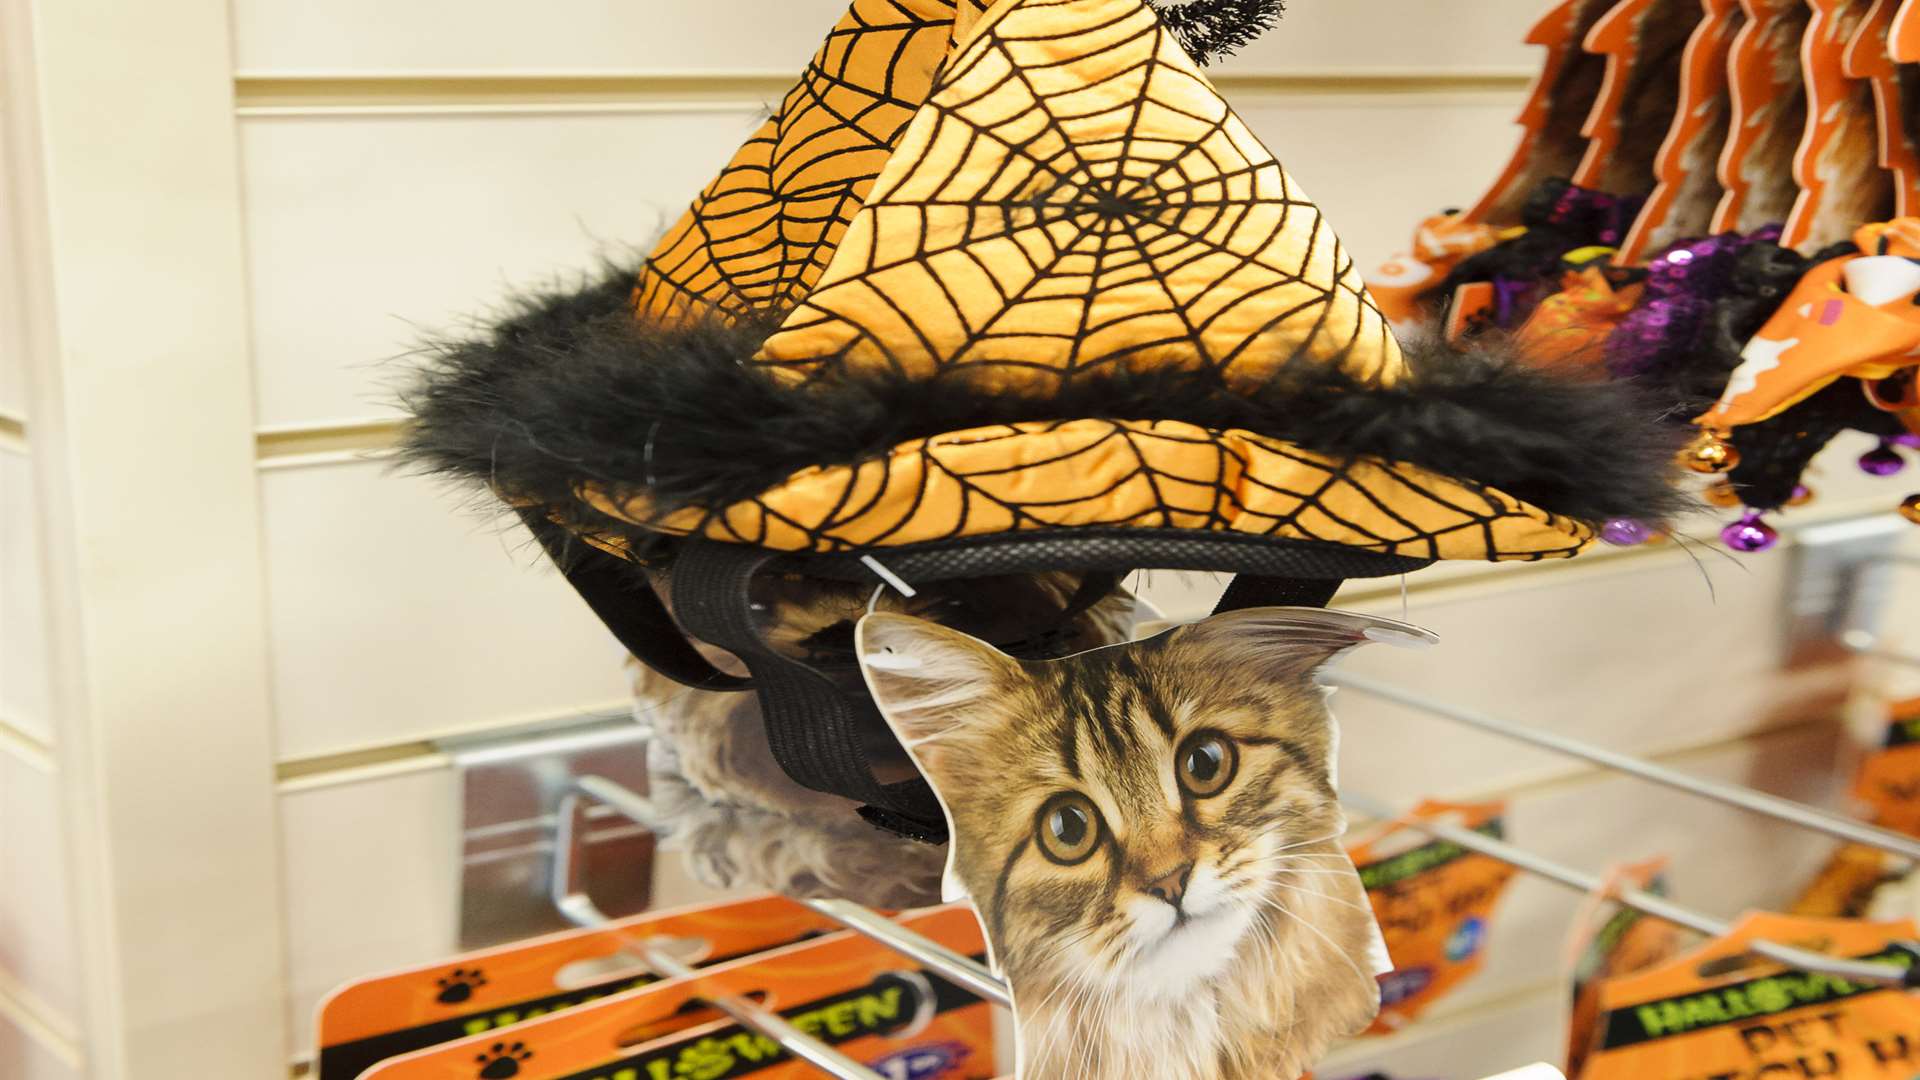 Halloween wear for cats at the new B&M Store in New Road, Gravesend